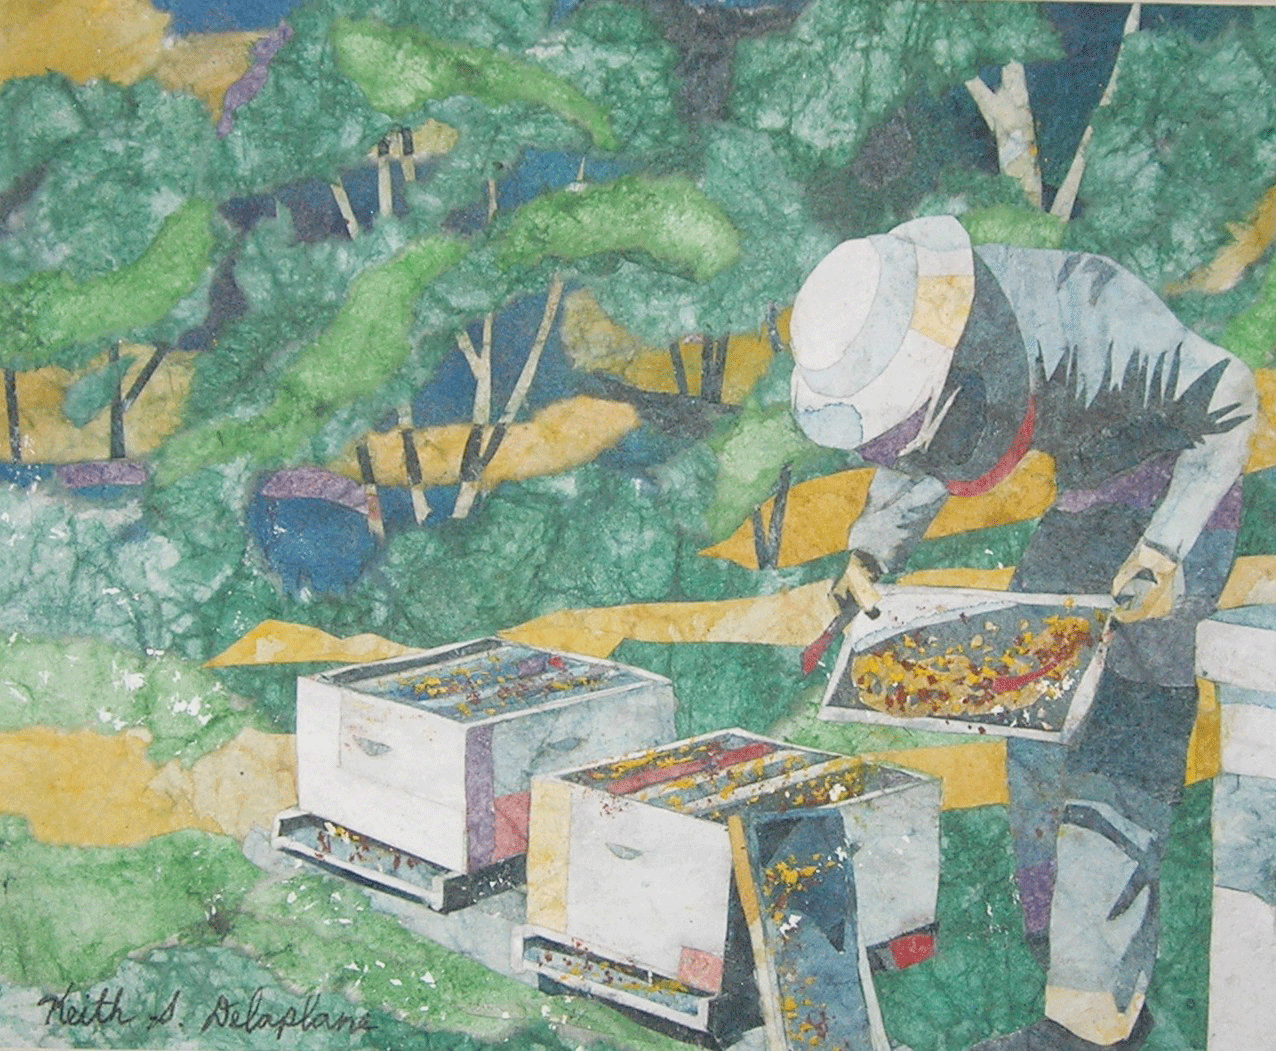 Painting of a beekeeper